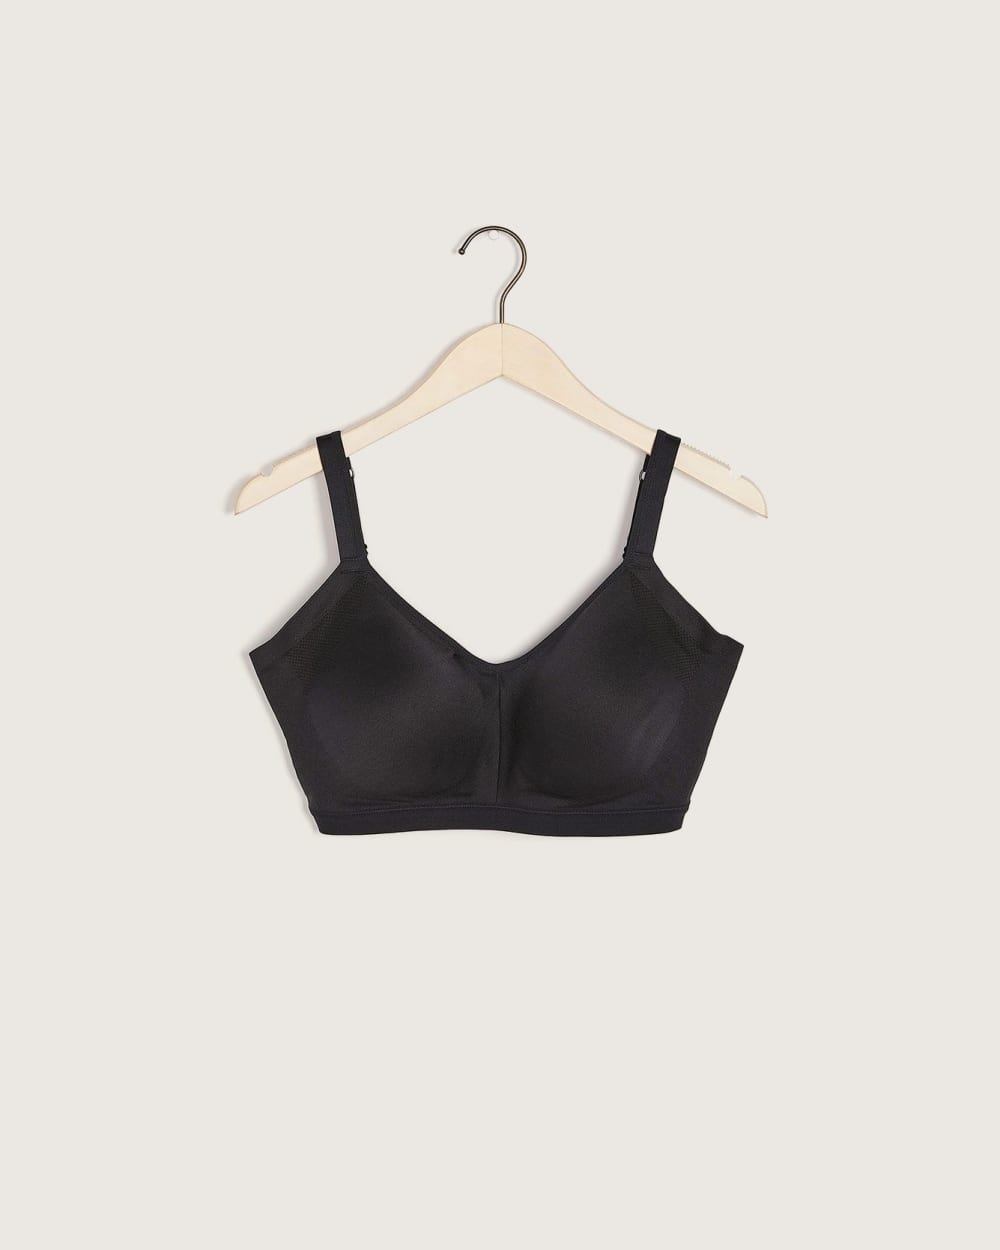 Intimate Apparel Consultancy - Wearing the wrong bra size is still  something 80% of women do, that's why proper bra fittings are so important.  We offer a range of professional #brafittingcourses at